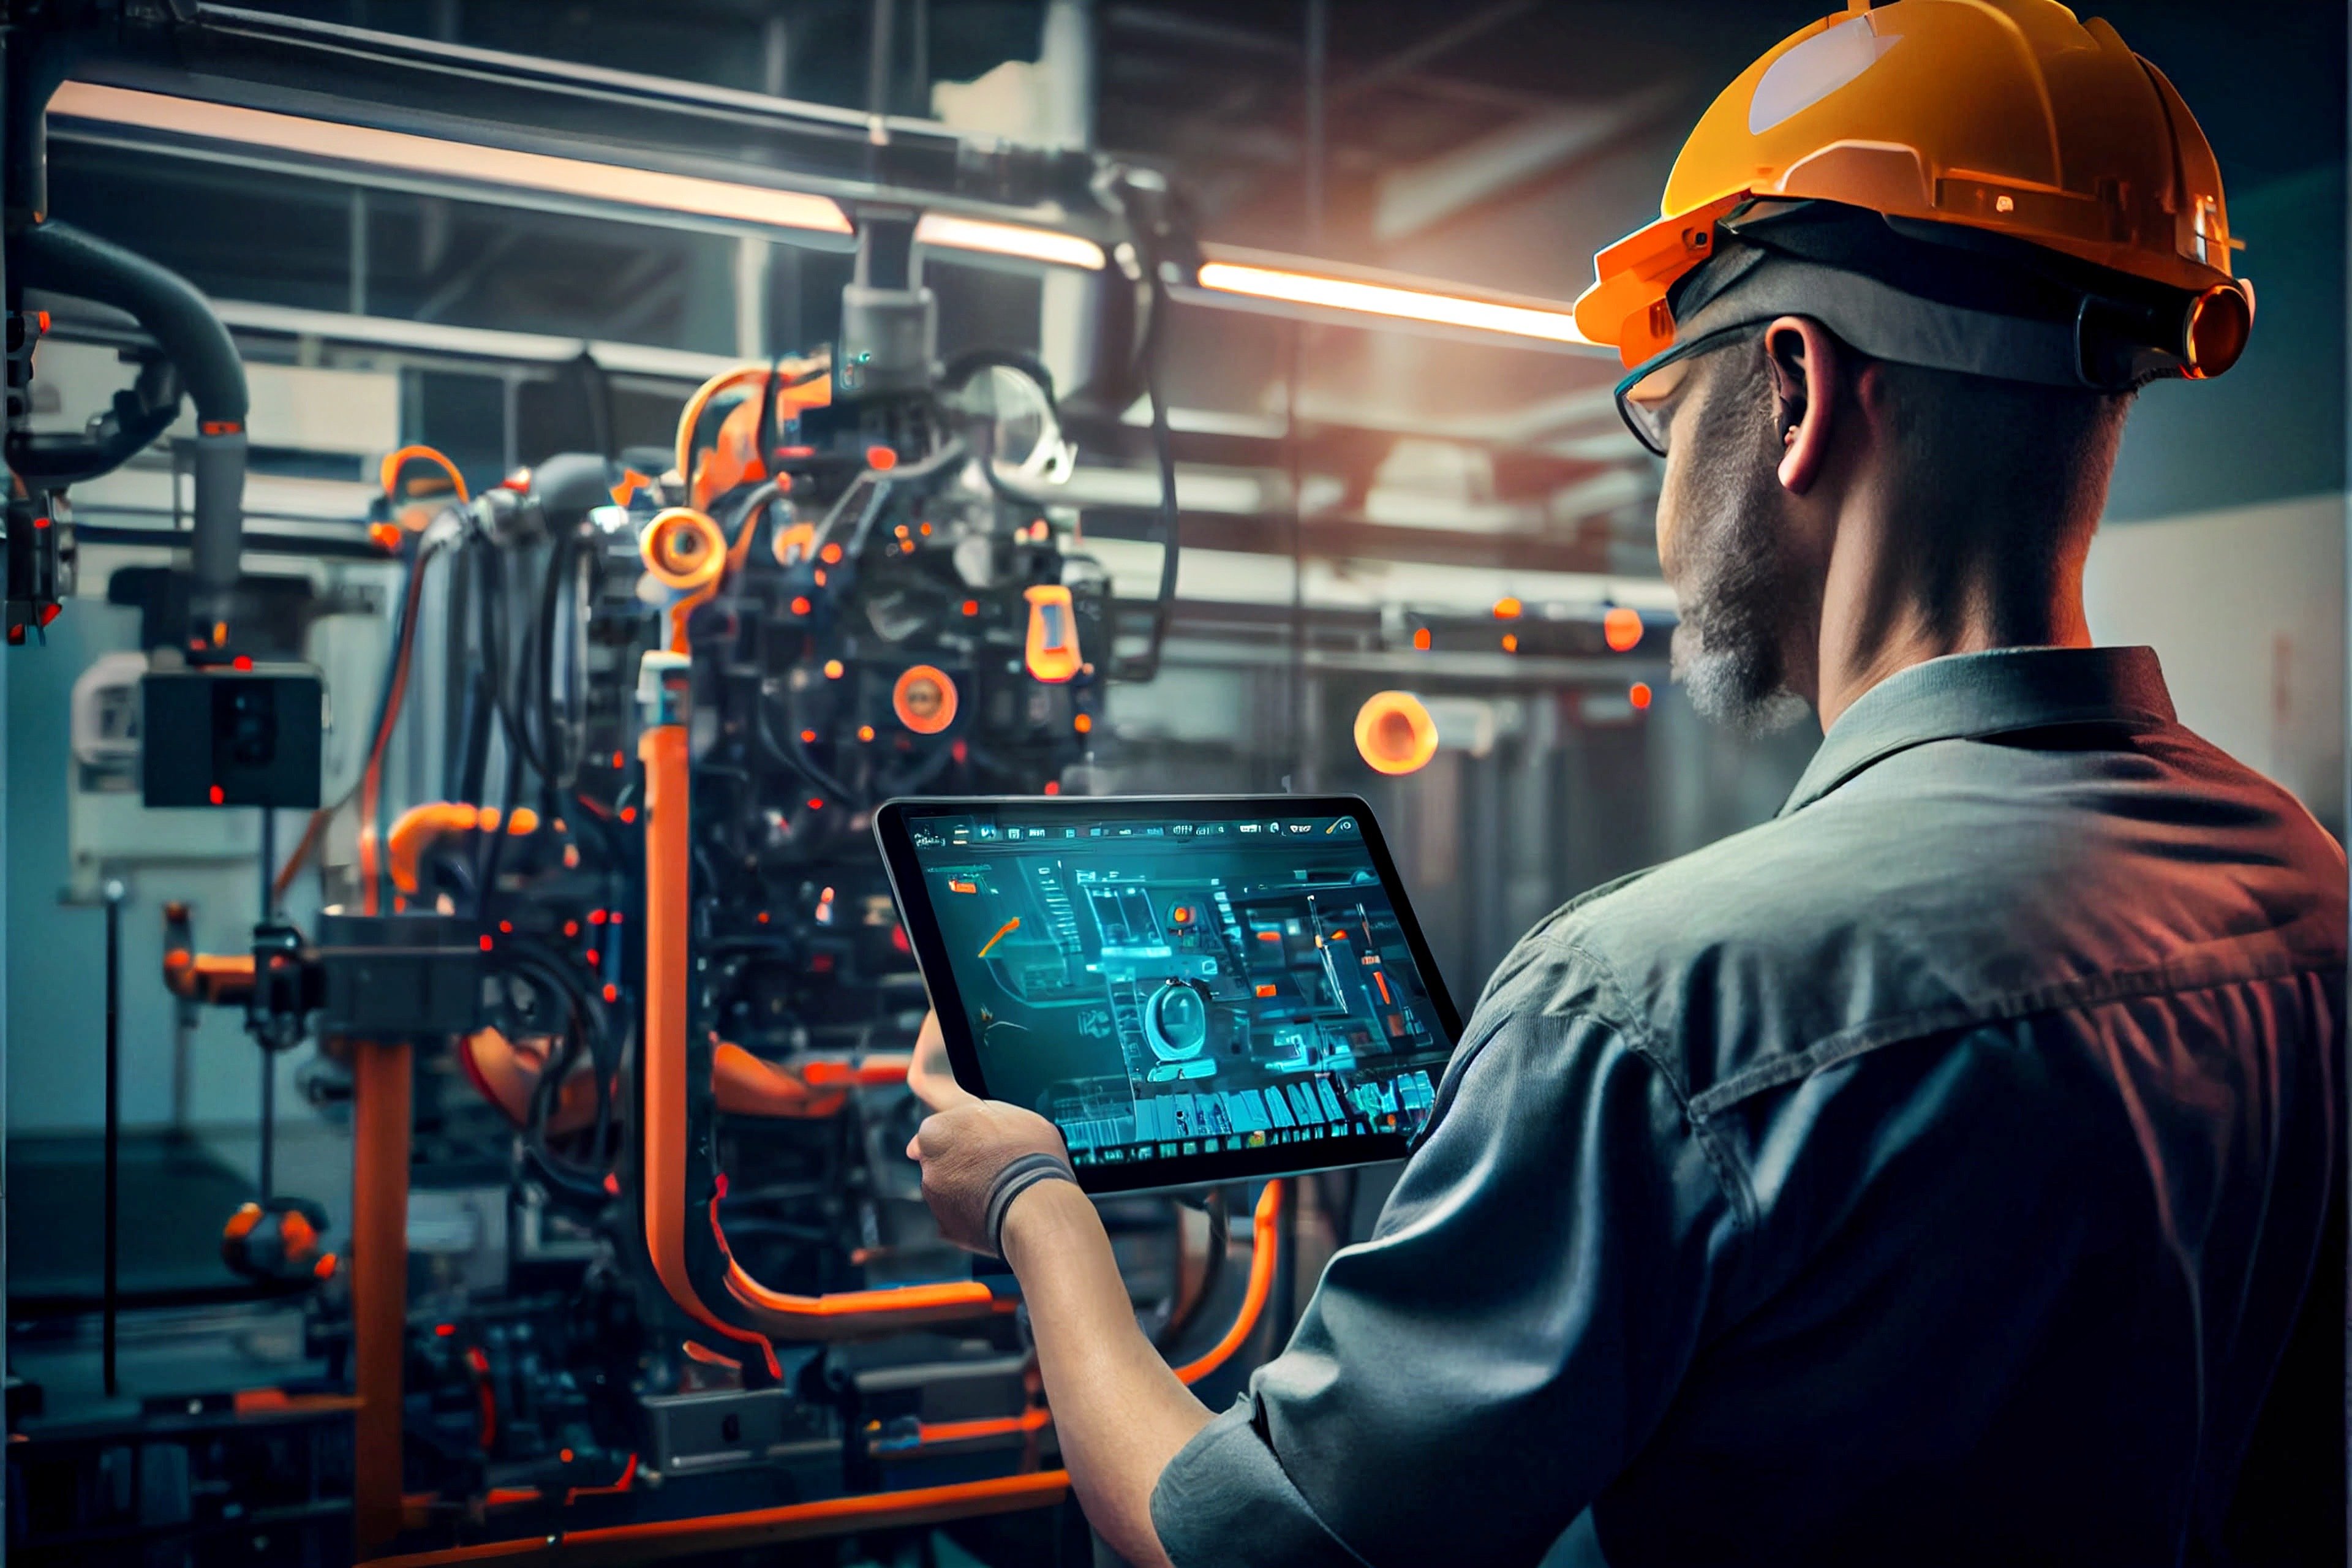 A technician wearing a hard hat uses a tablet to monitor a manufacturing process, representing Fast Fixx's tailored compliance solutions for specific industries